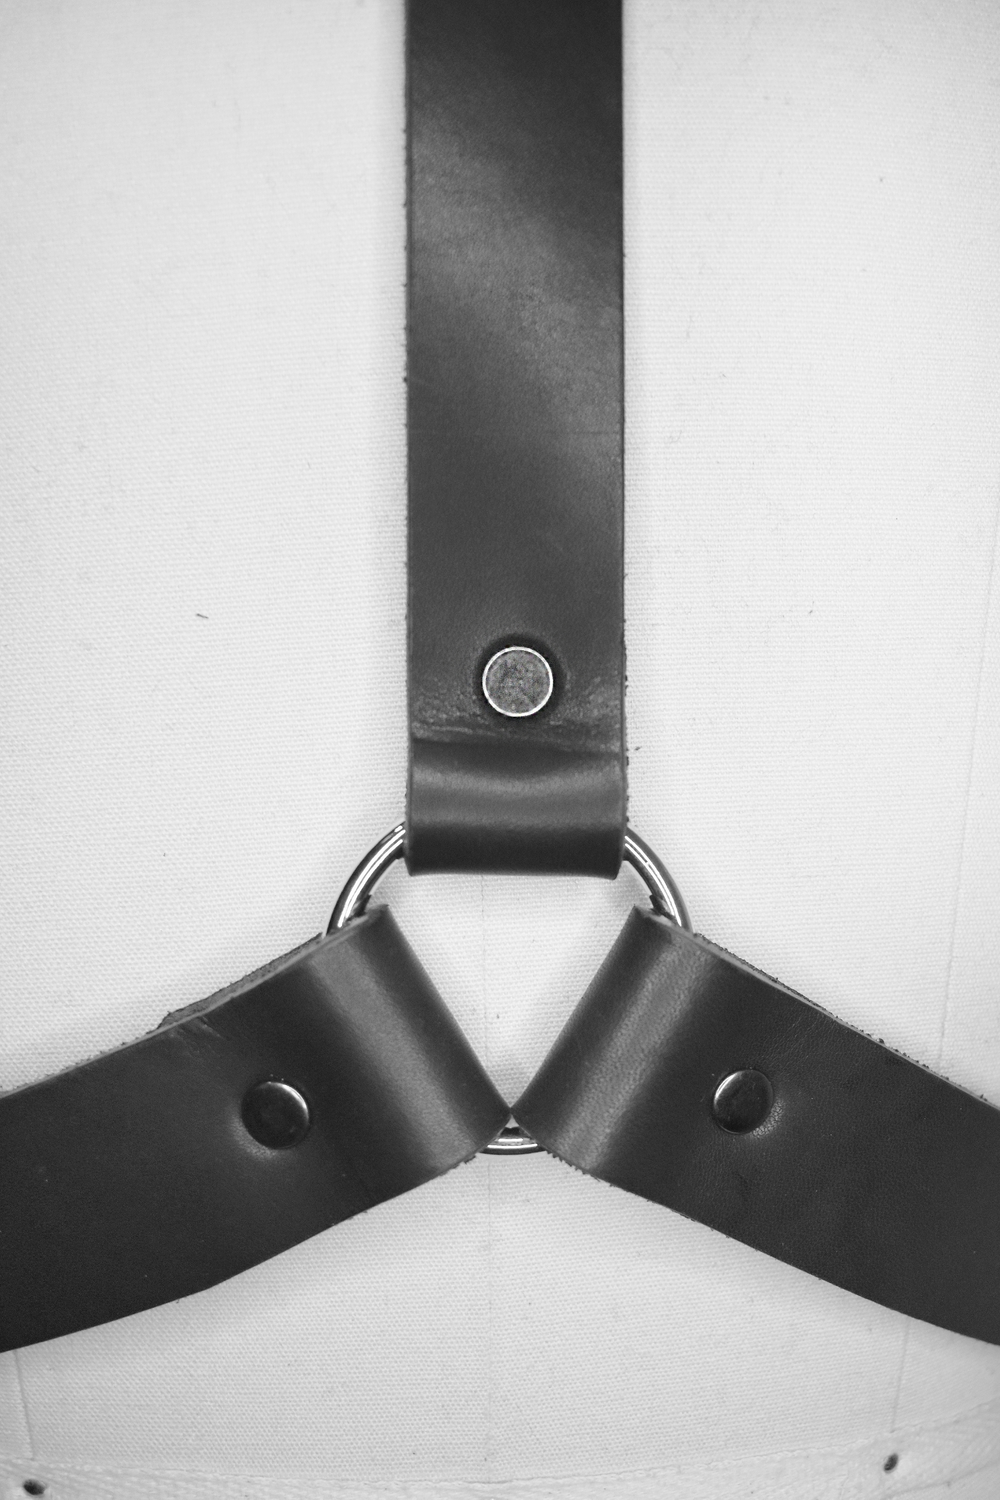 BLACK LEATHER HARNESS